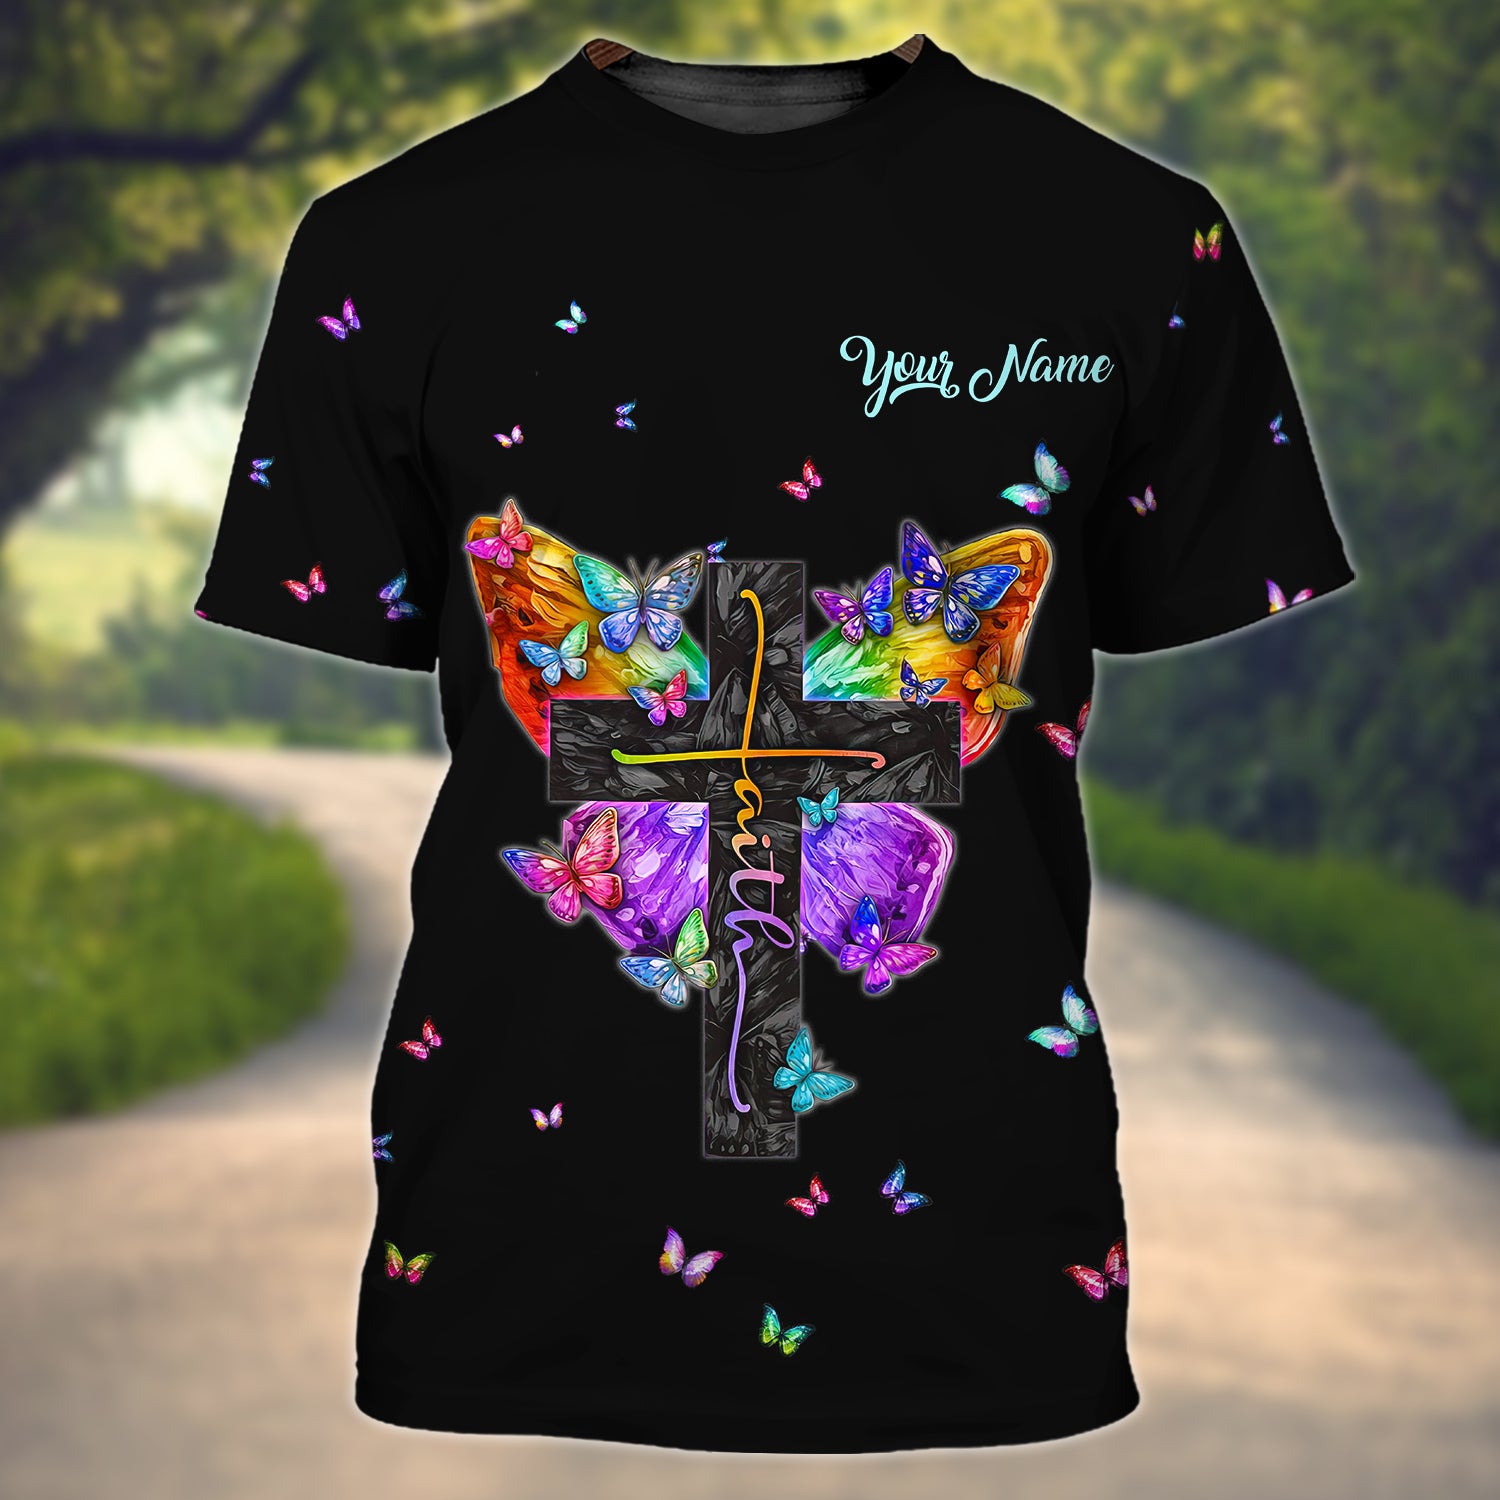 December Queen - Personalized Name 3D Tshirt 57 - Bhn97